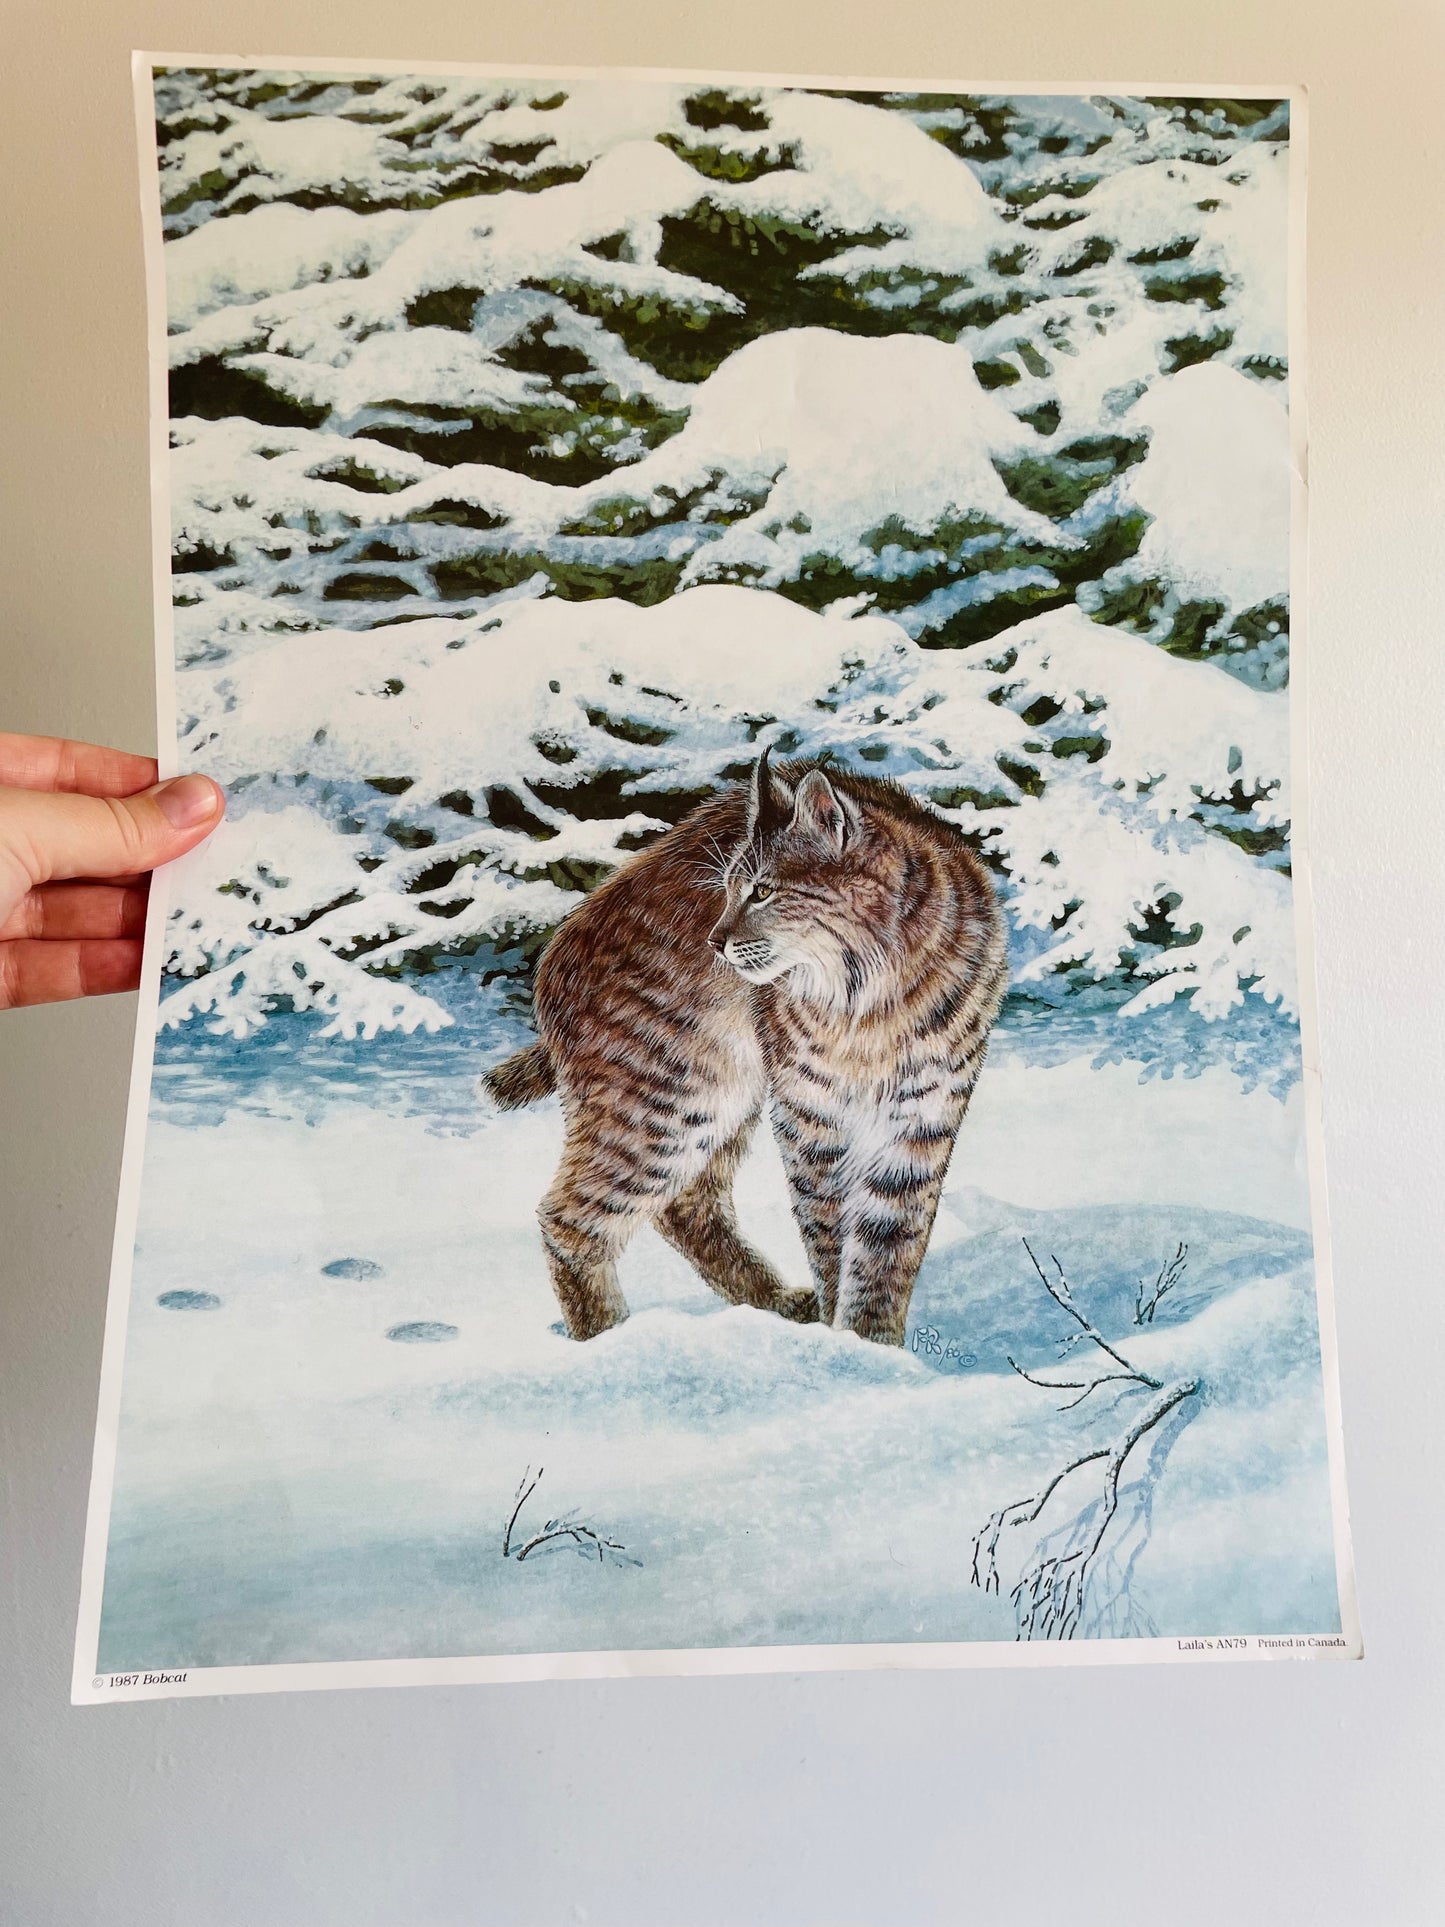 Bobcat Poster Print - Ready for Framing! Printed in Canada (1987)